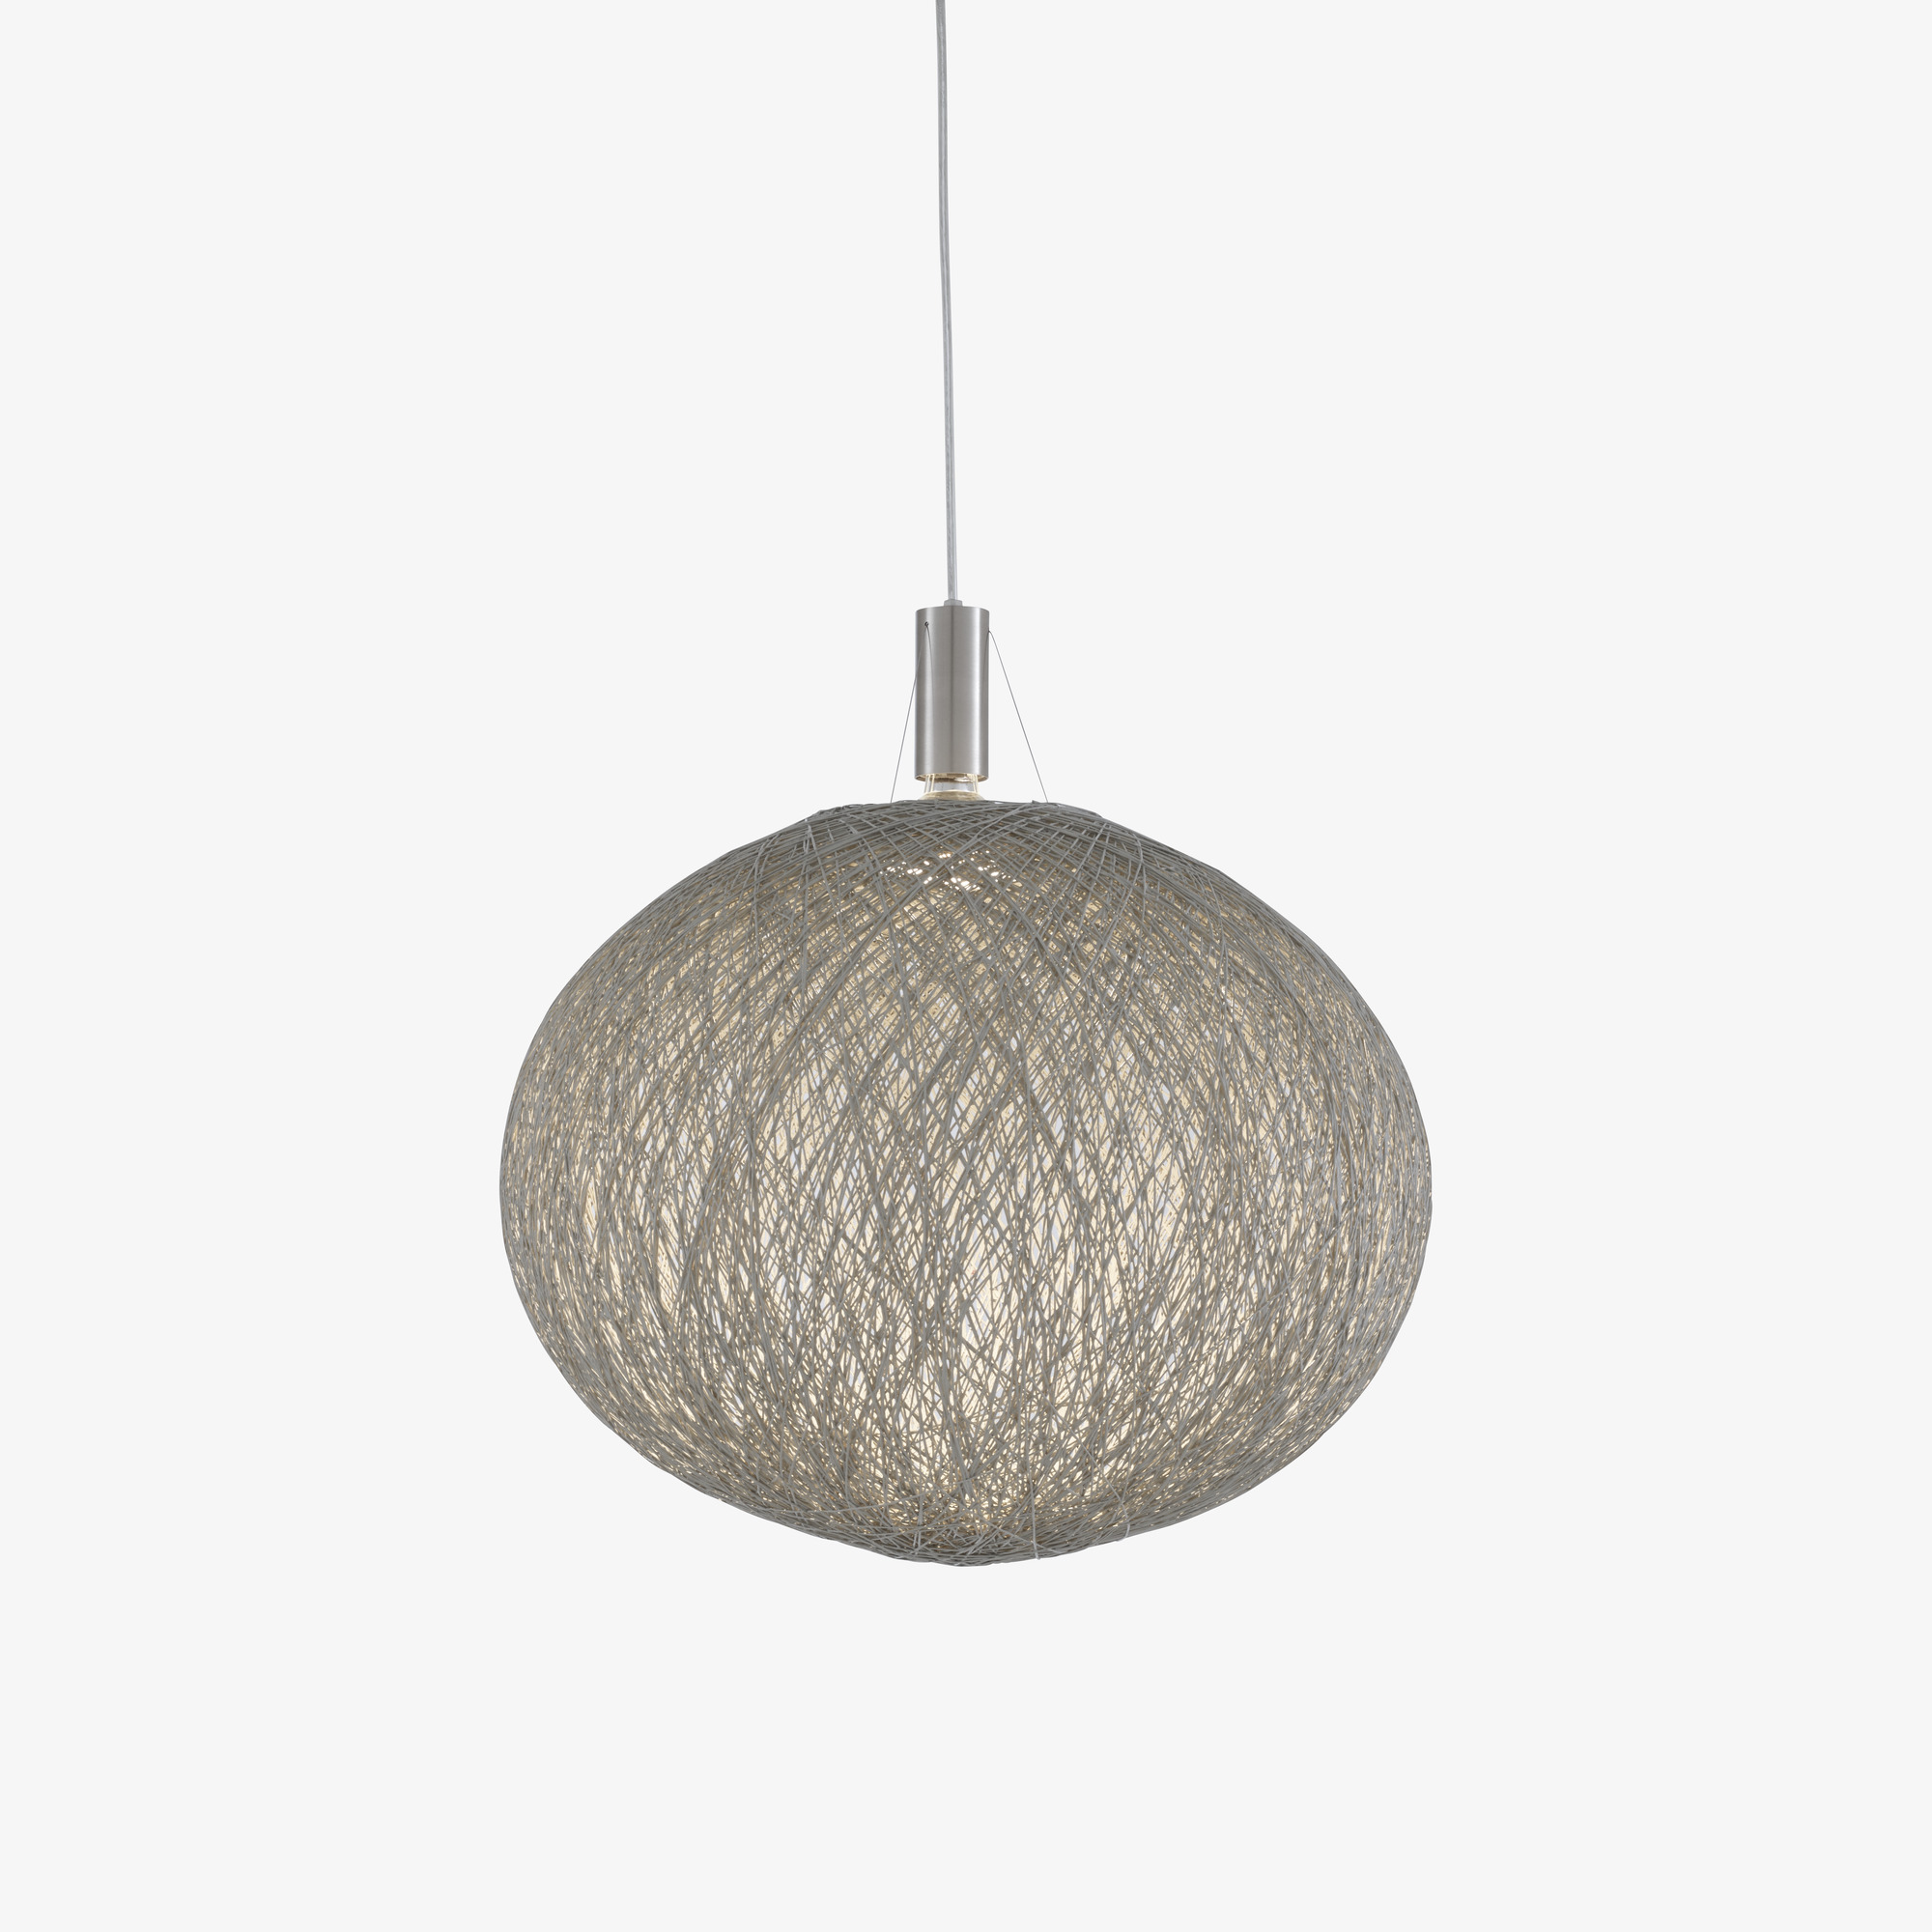 Image Suspended ceiling light 5